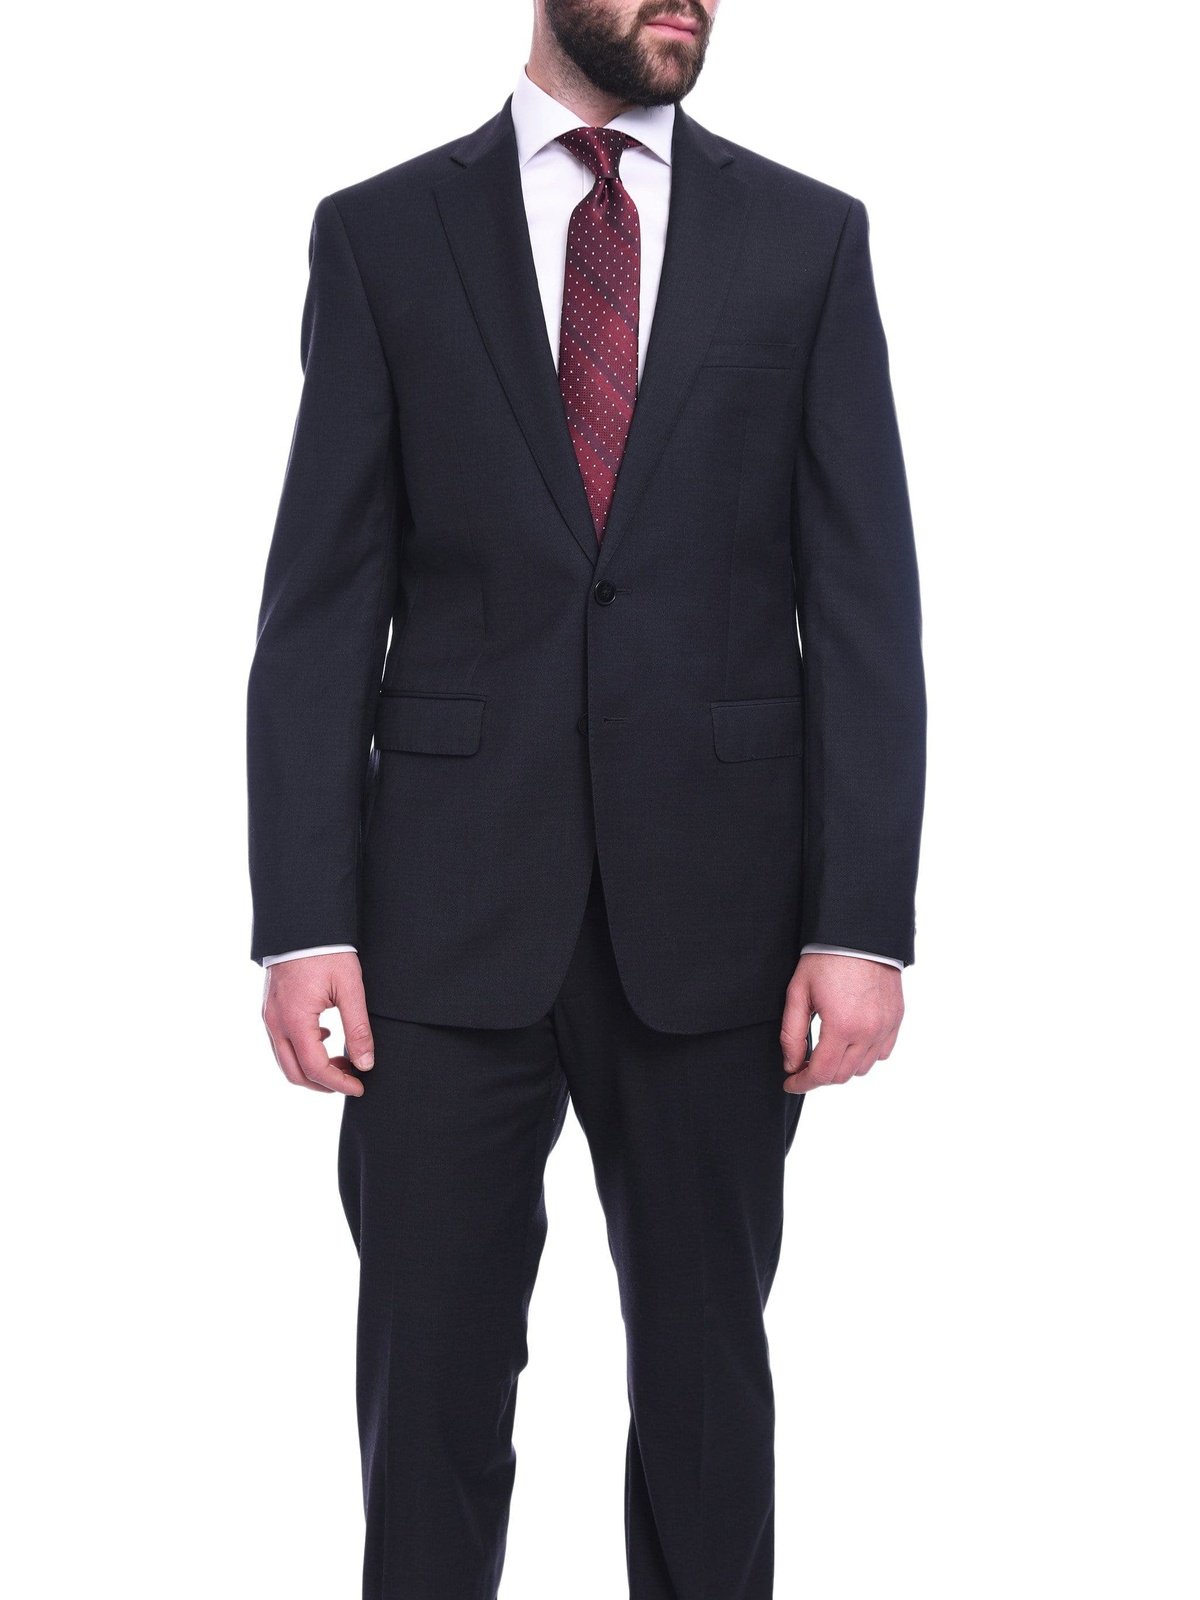 Calvin Klein TWO PIECE SUITS 40R Calvin Klein Extreme Slim Fit Solid Charcoal Gray Two Button Wool Suit